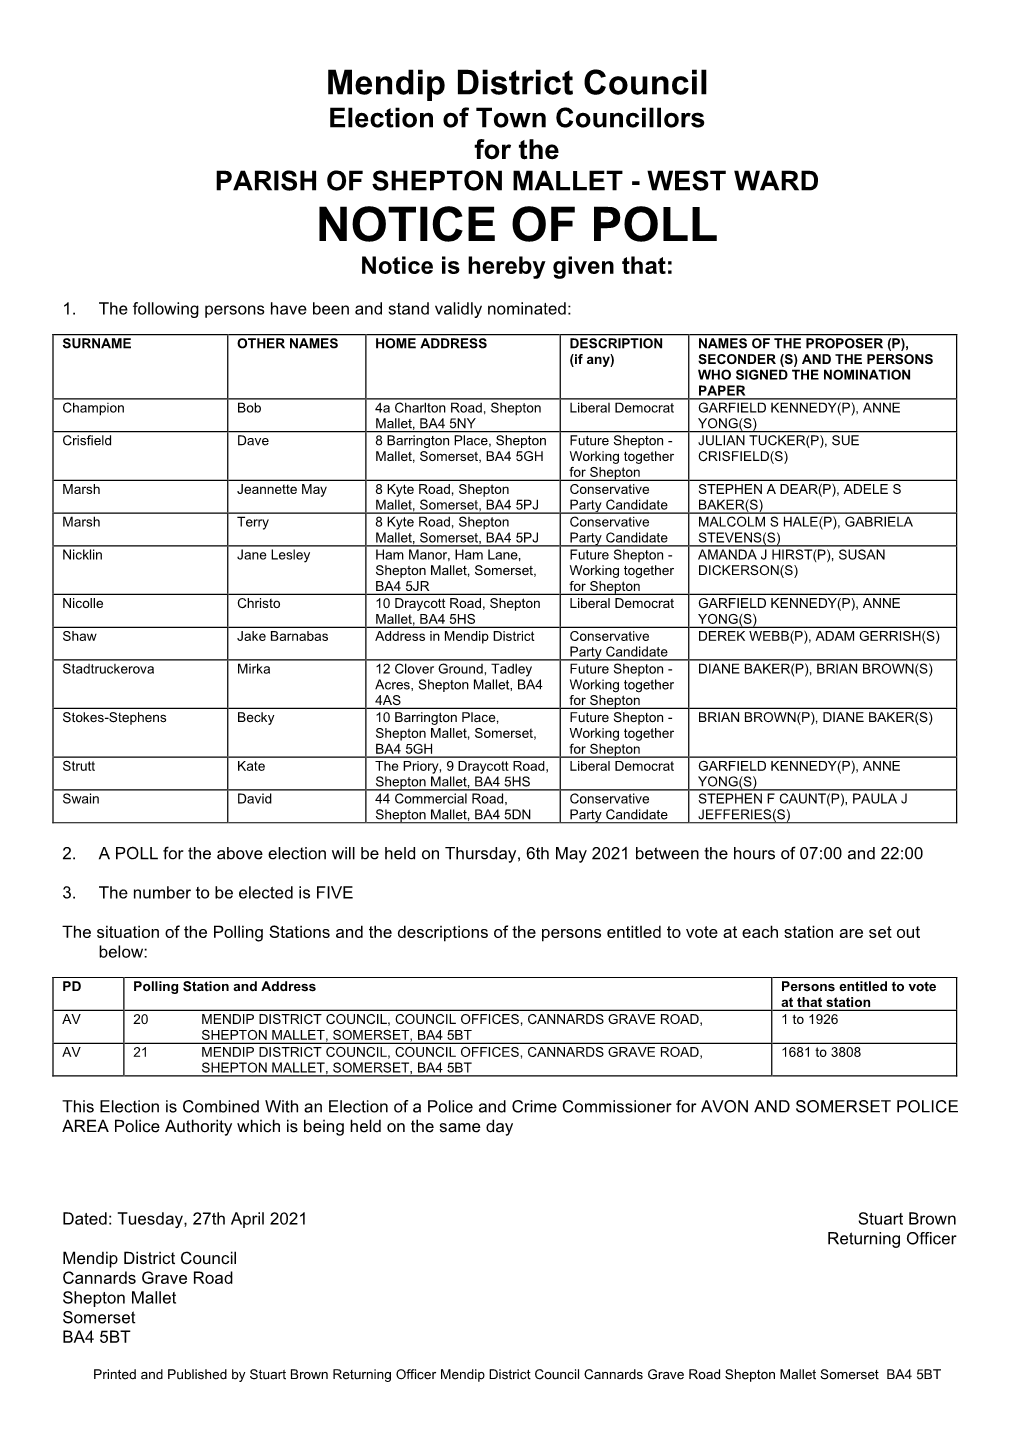 Notice of Poll for the Parish of Shepton Mallet